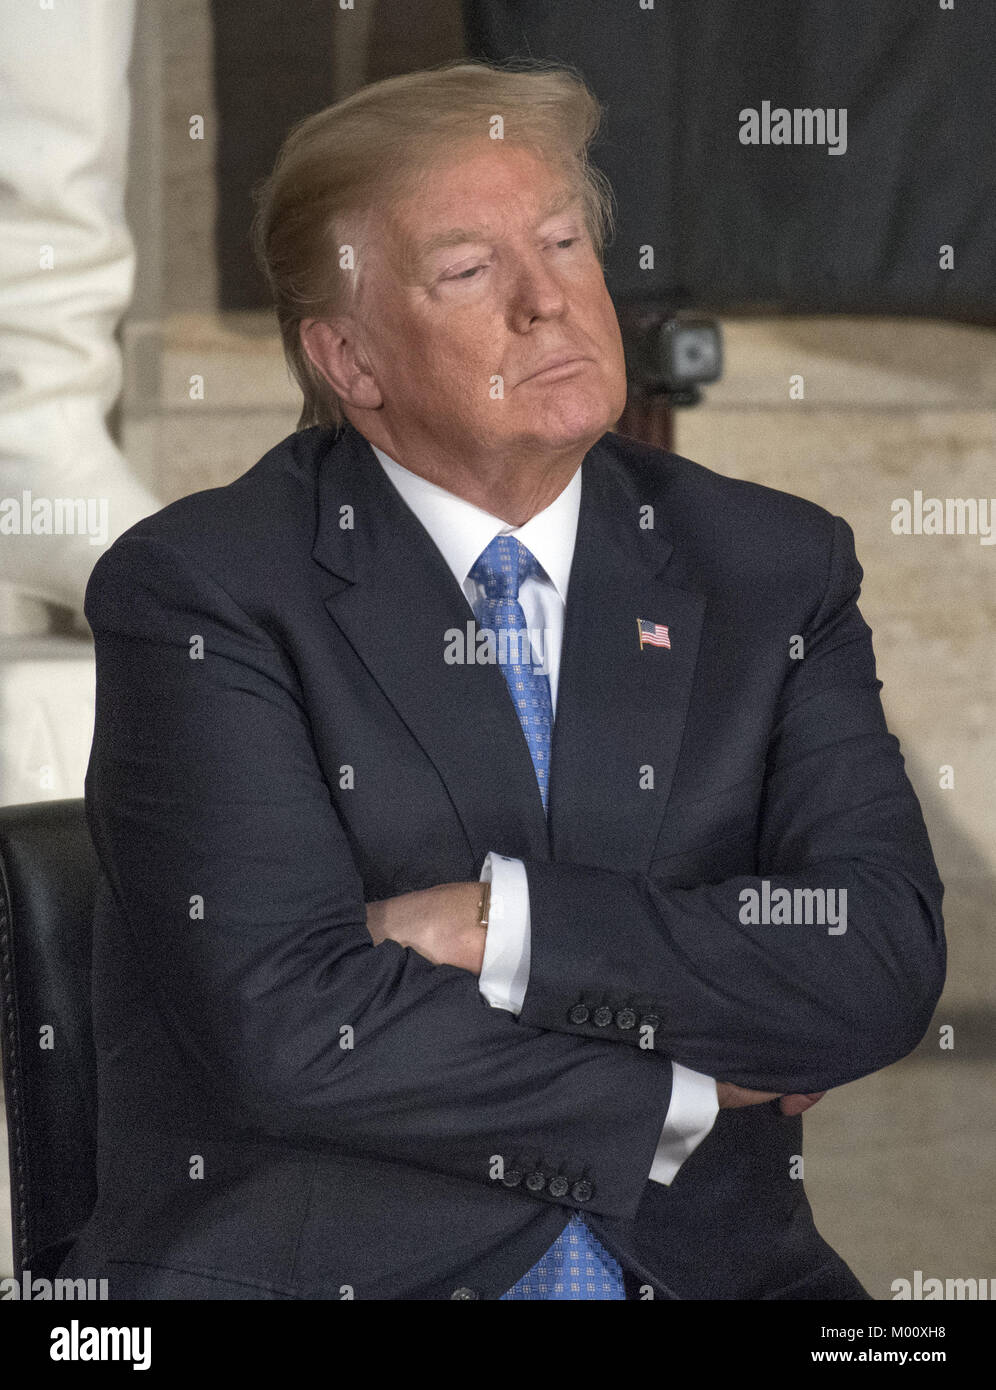 January 17, 2018 - Washington, District of Columbia, United States of America - United States President Donald J. Trump listens to remarks as he attends a Congressional Gold Medal ceremony honoring former US Senator Bob Dole (Republican of Kansas) in the Rotunda of the US Capitol on Wednesday, January 17, 2017. Congress commissioned gold medals as its highest expression of national appreciation for distinguished achievements and contributions. Dole served in Congress from 1961 through 1996, was the Senate GOP leader from 1985 through 1996, and was the 1996 Republican Party nominee for Presid Stock Photo